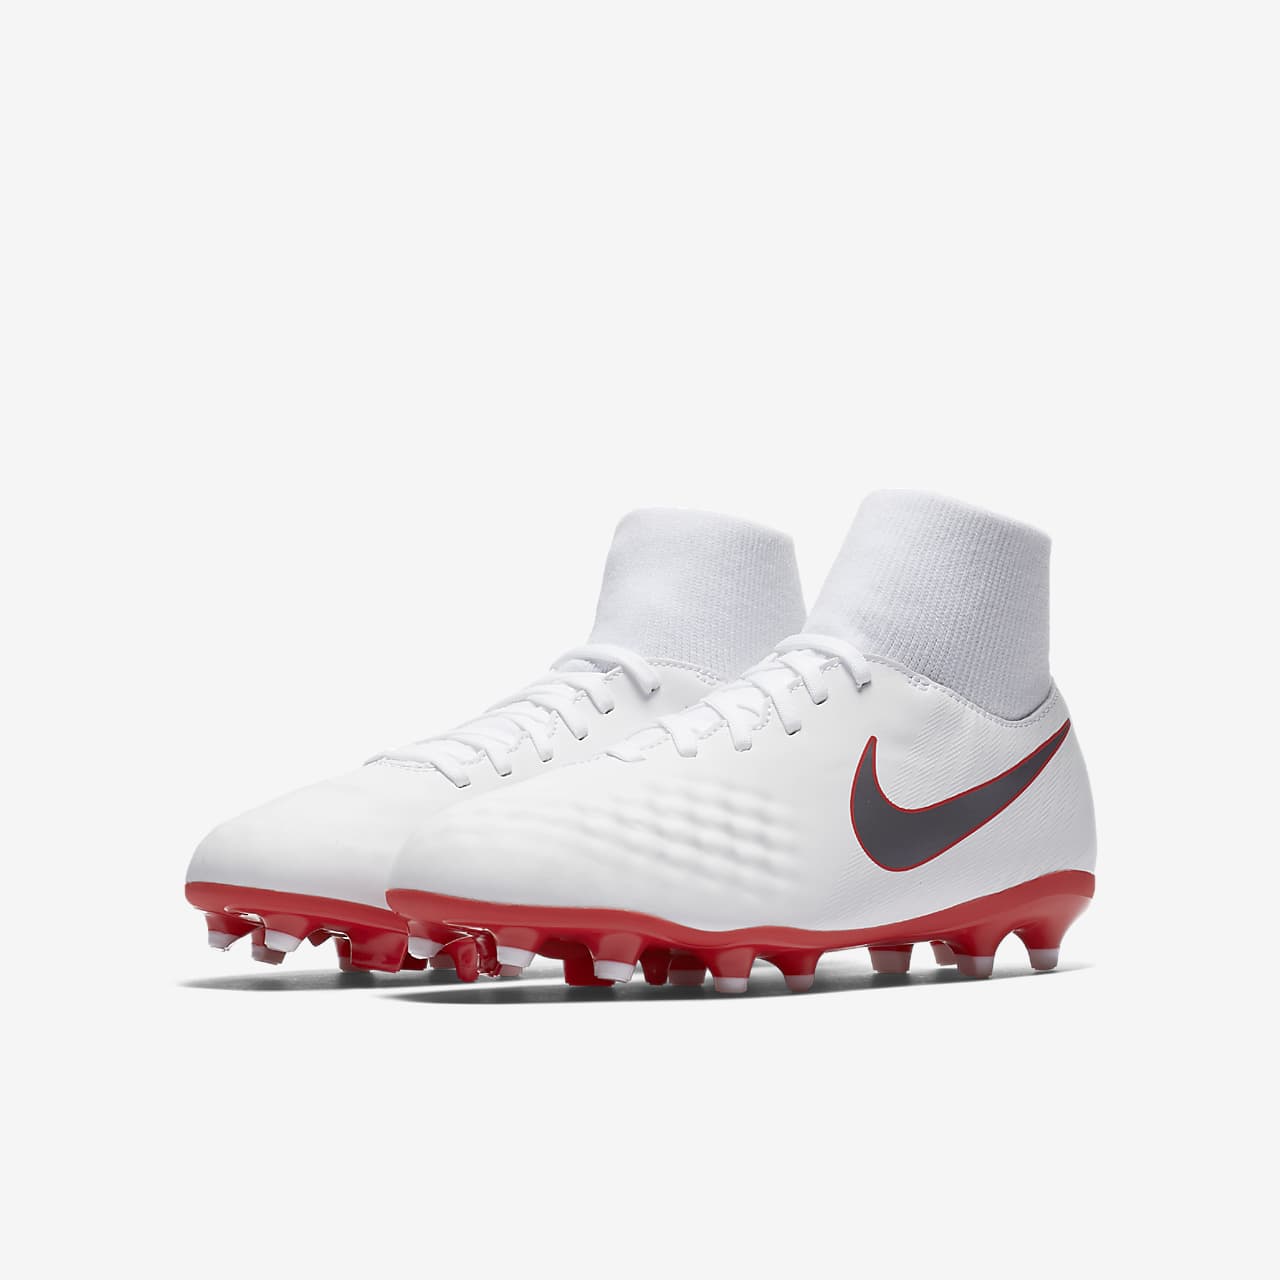 Nike Jr. Magista Obra II Academy Dynamic Fit Just Do It FG Younger/Older  Kids' Firm-Ground Football Boot. Nike SA